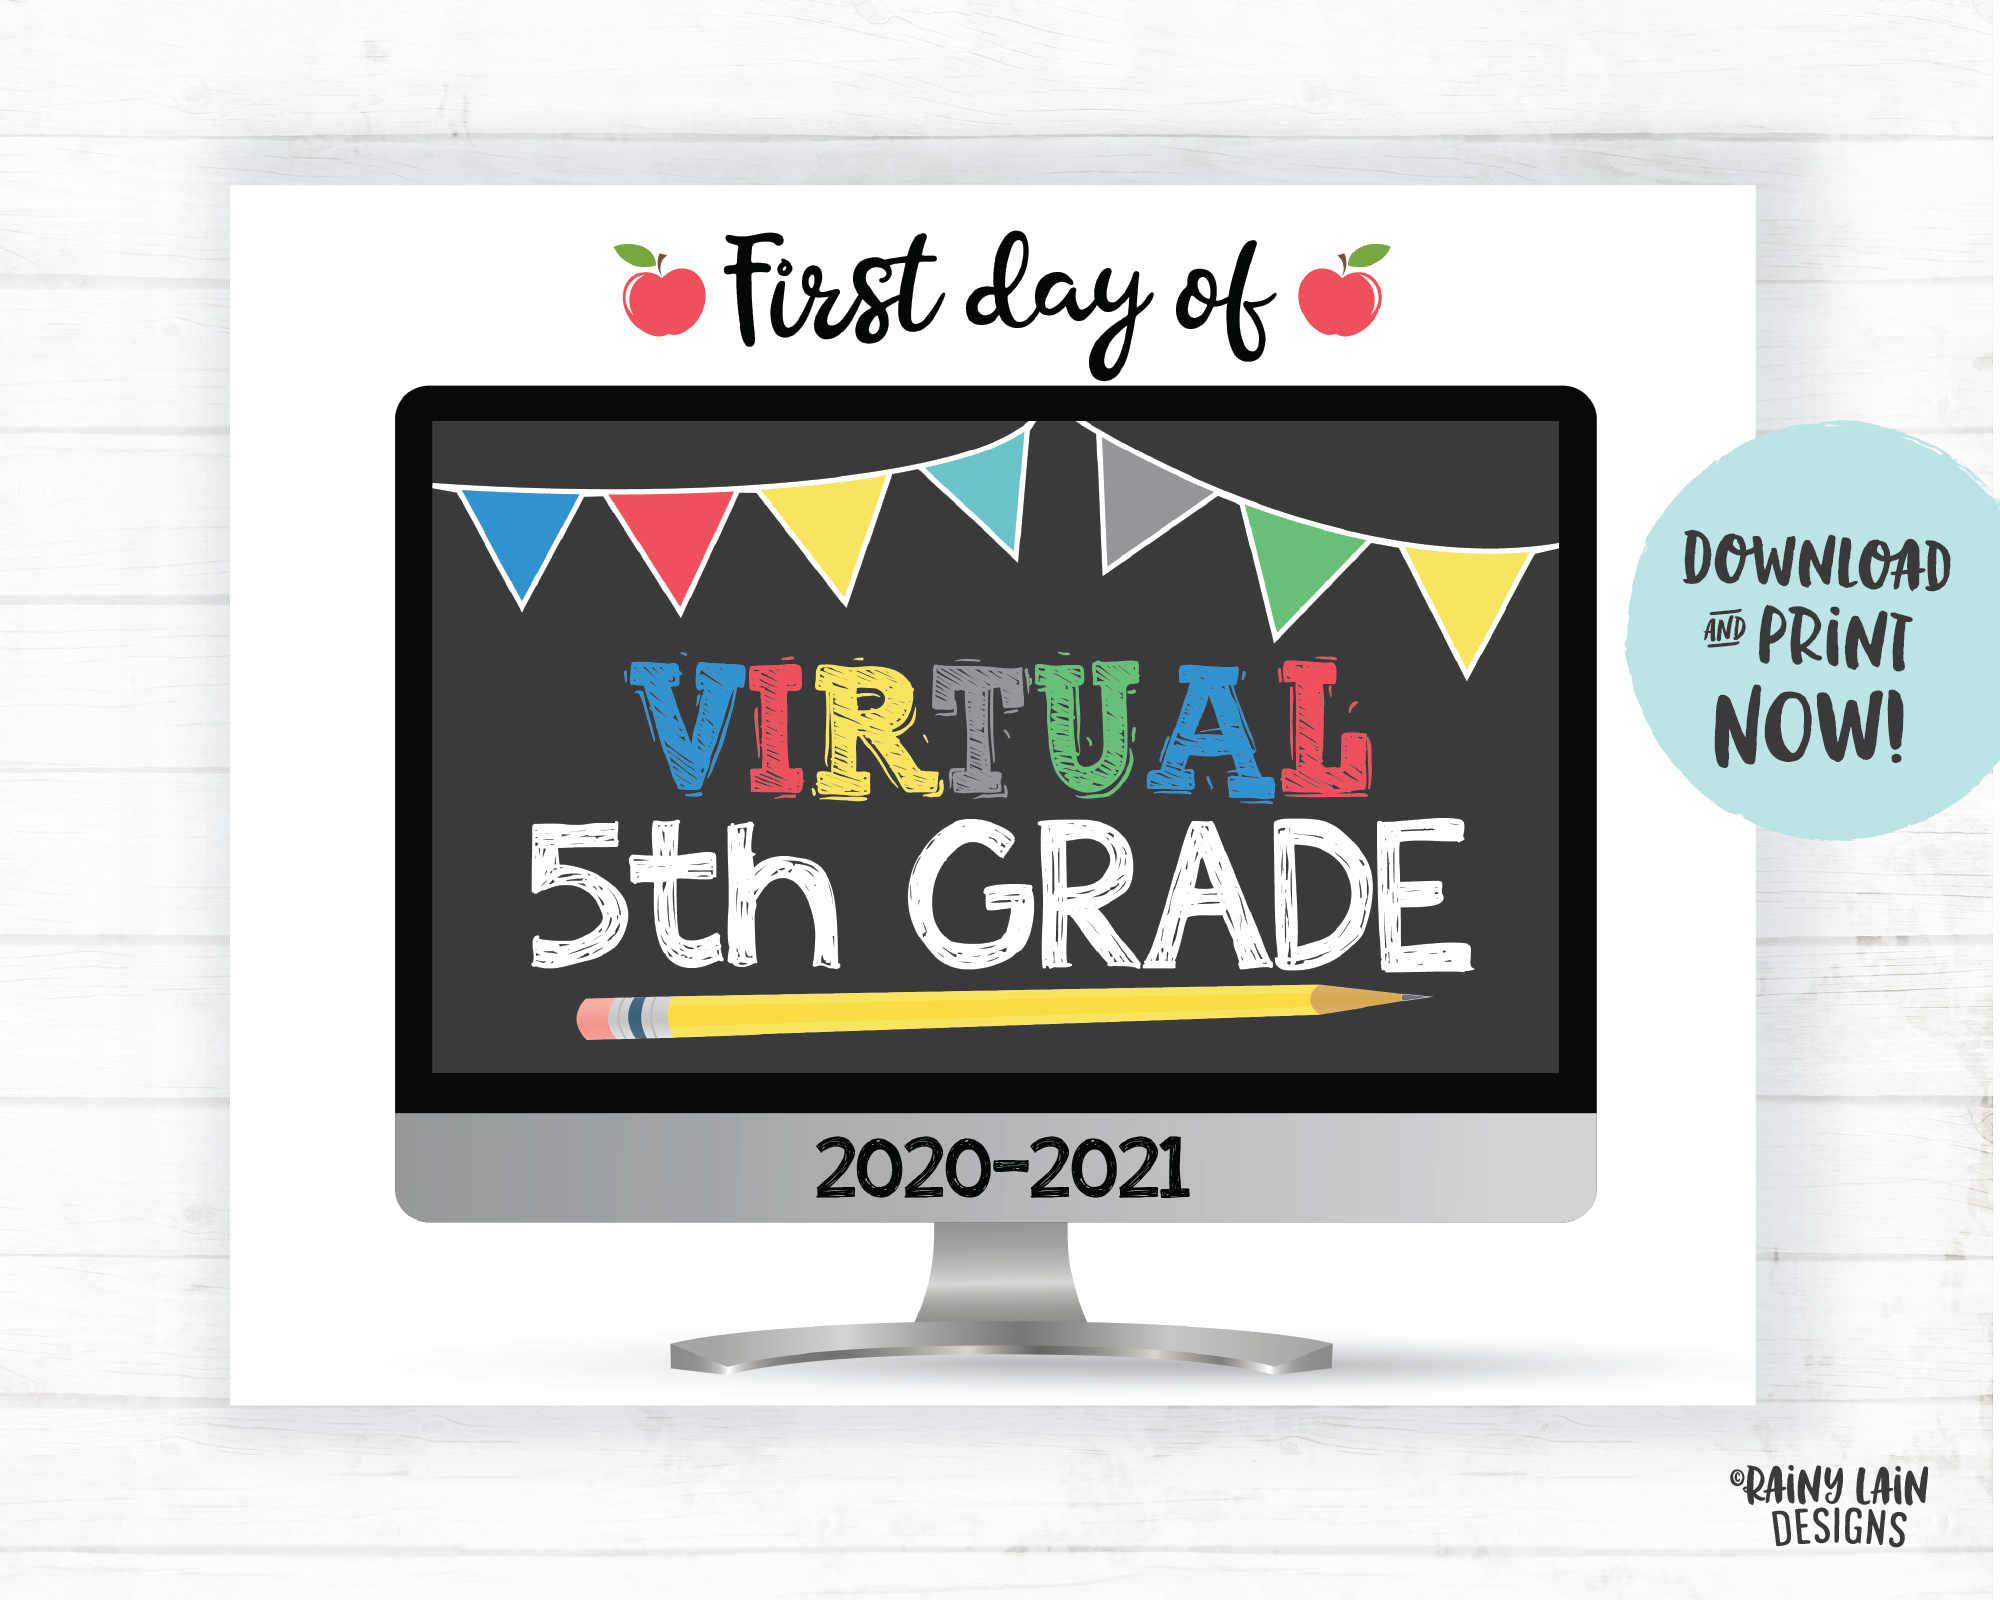 First Day of Virtual 5th Grade Sign, First Day of Distance Learning Sign, Virtual School Sign, E-Learning Sign, Online School, Home School